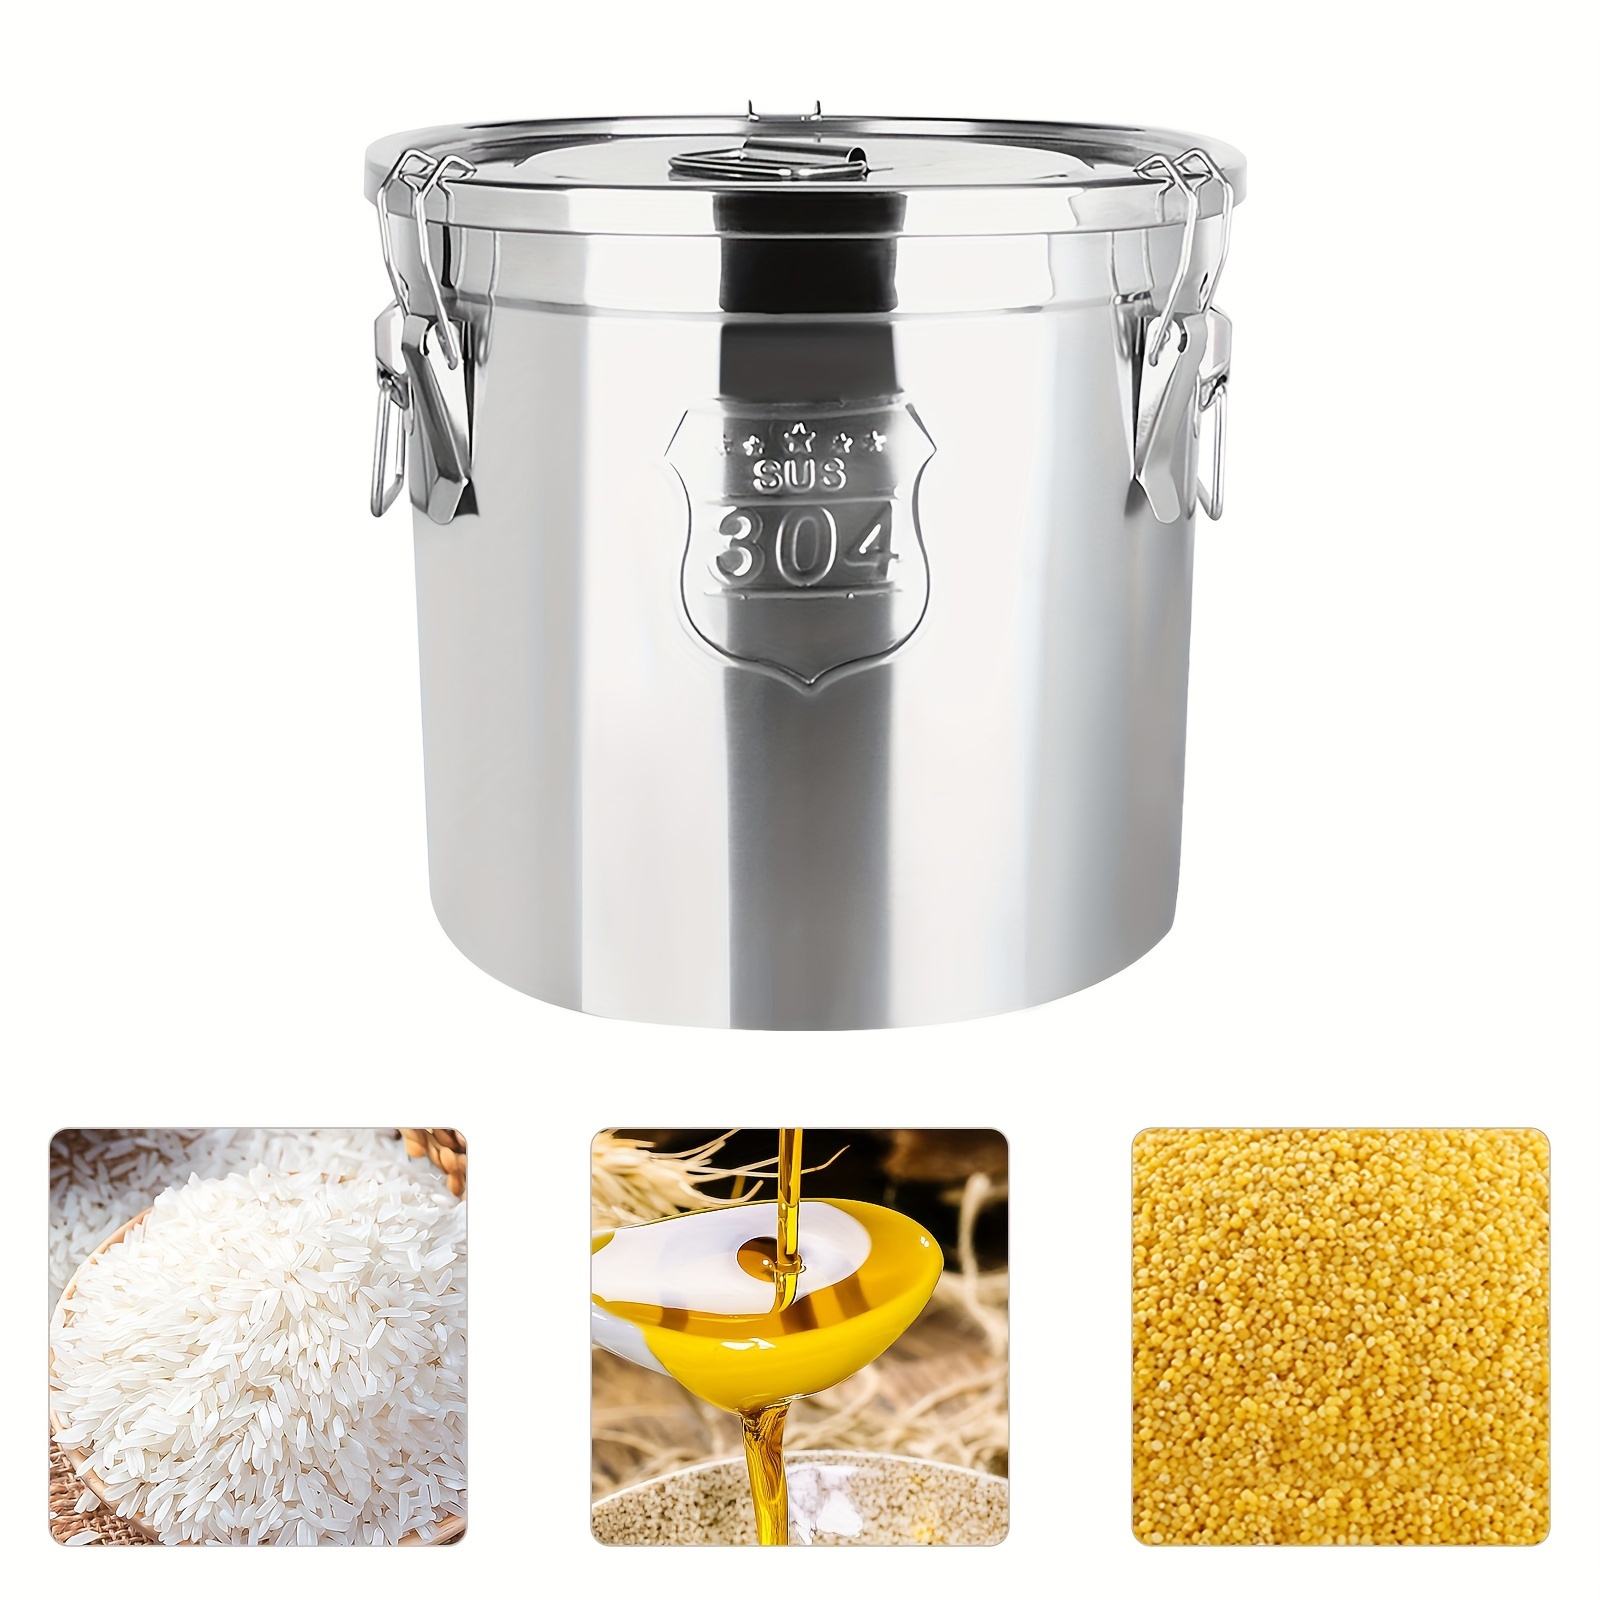 

Airtight Rice Bucket 304 Stainless Steel Canister Food Storage Containers 6 L